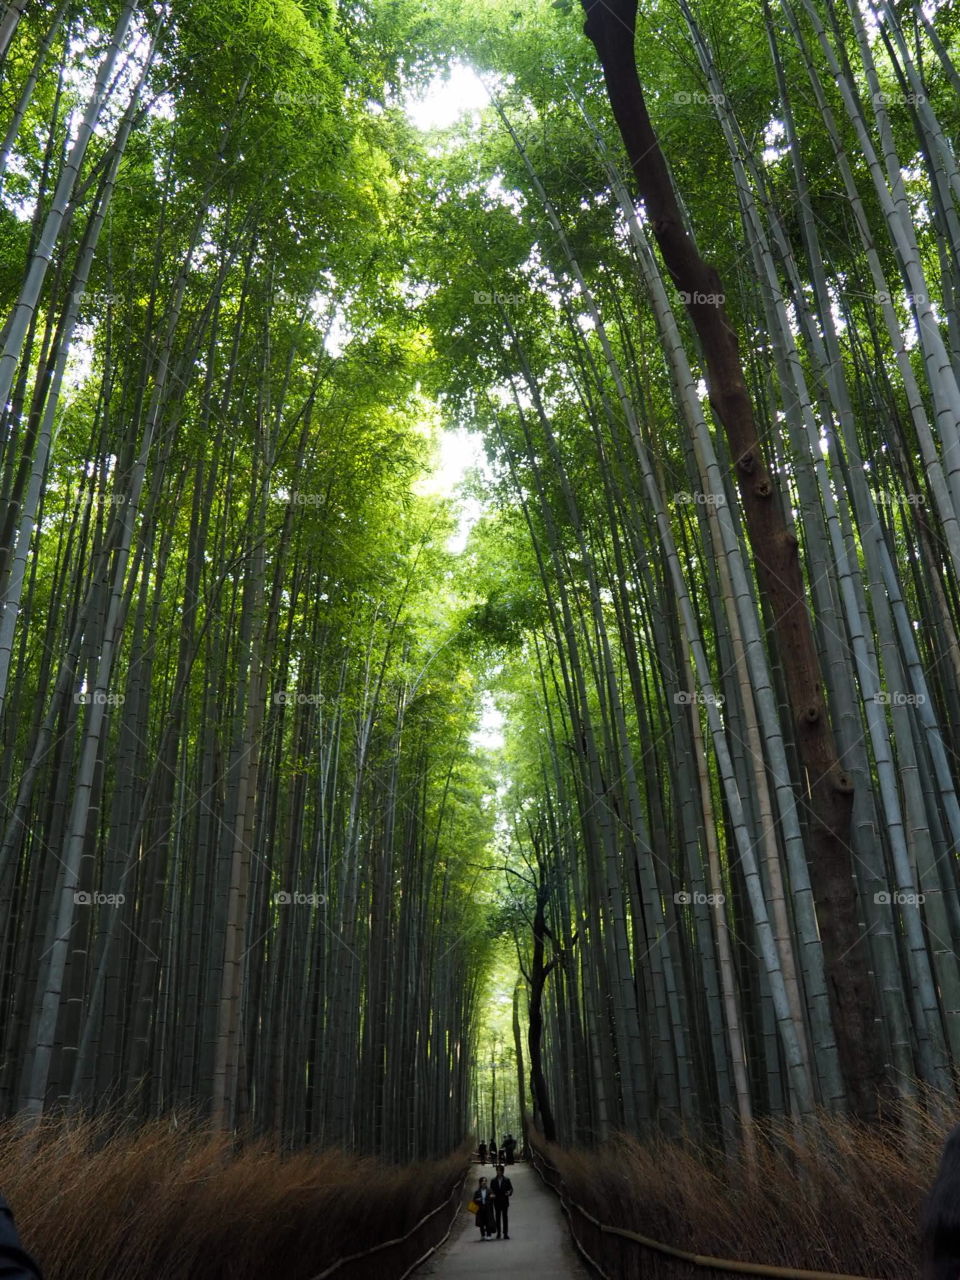 Bamboo forest 